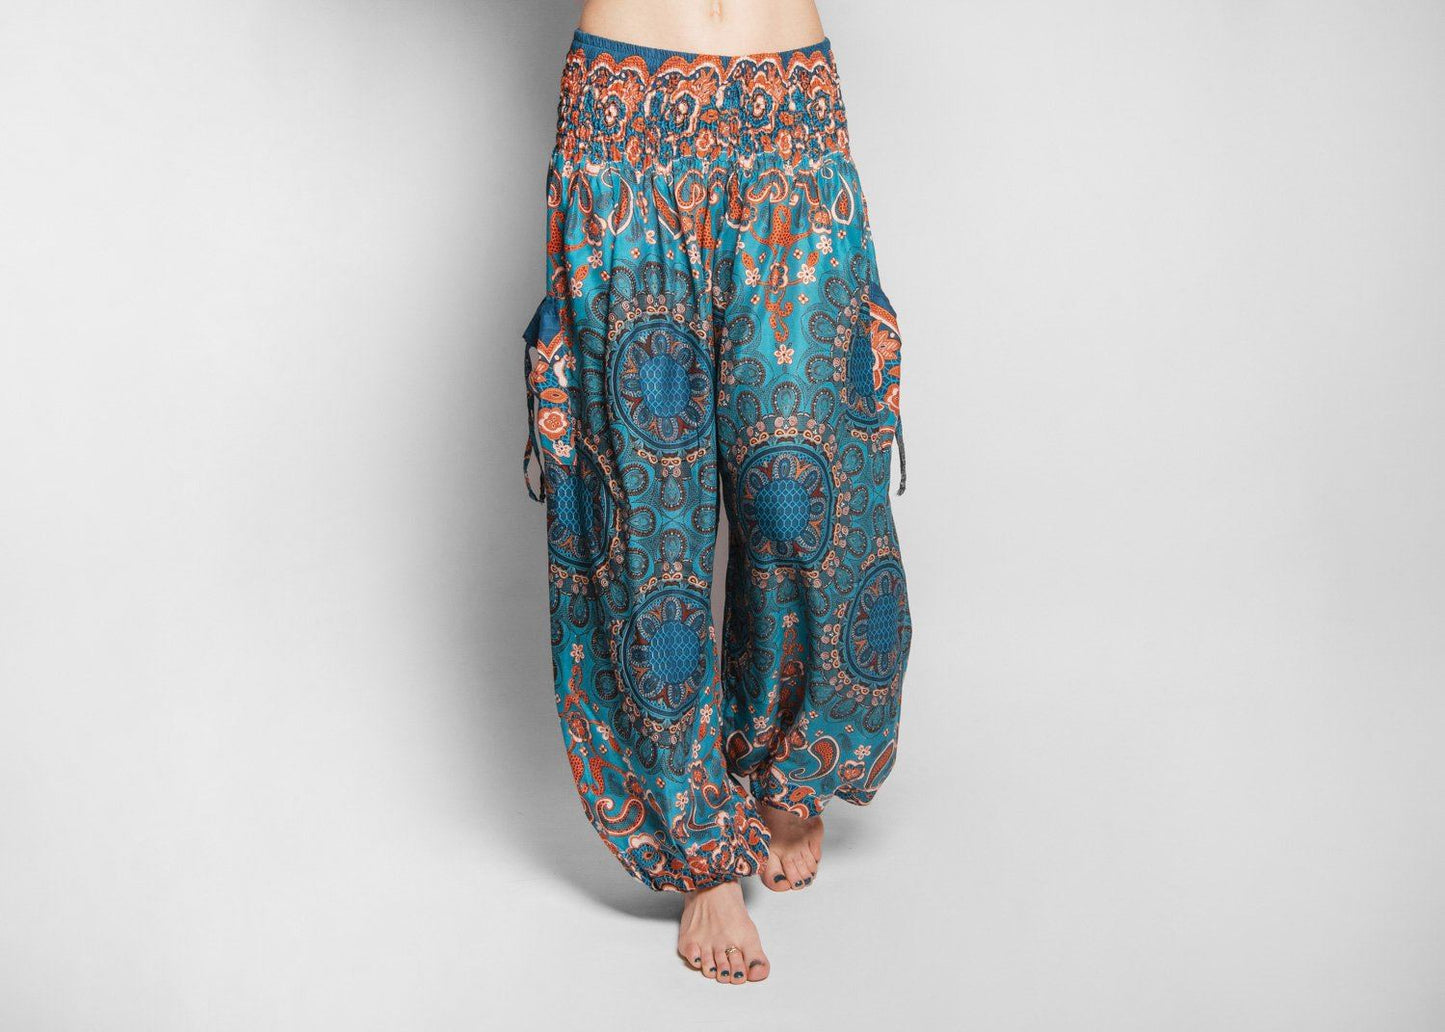 patterned harem pants with pockets in turquoise orange